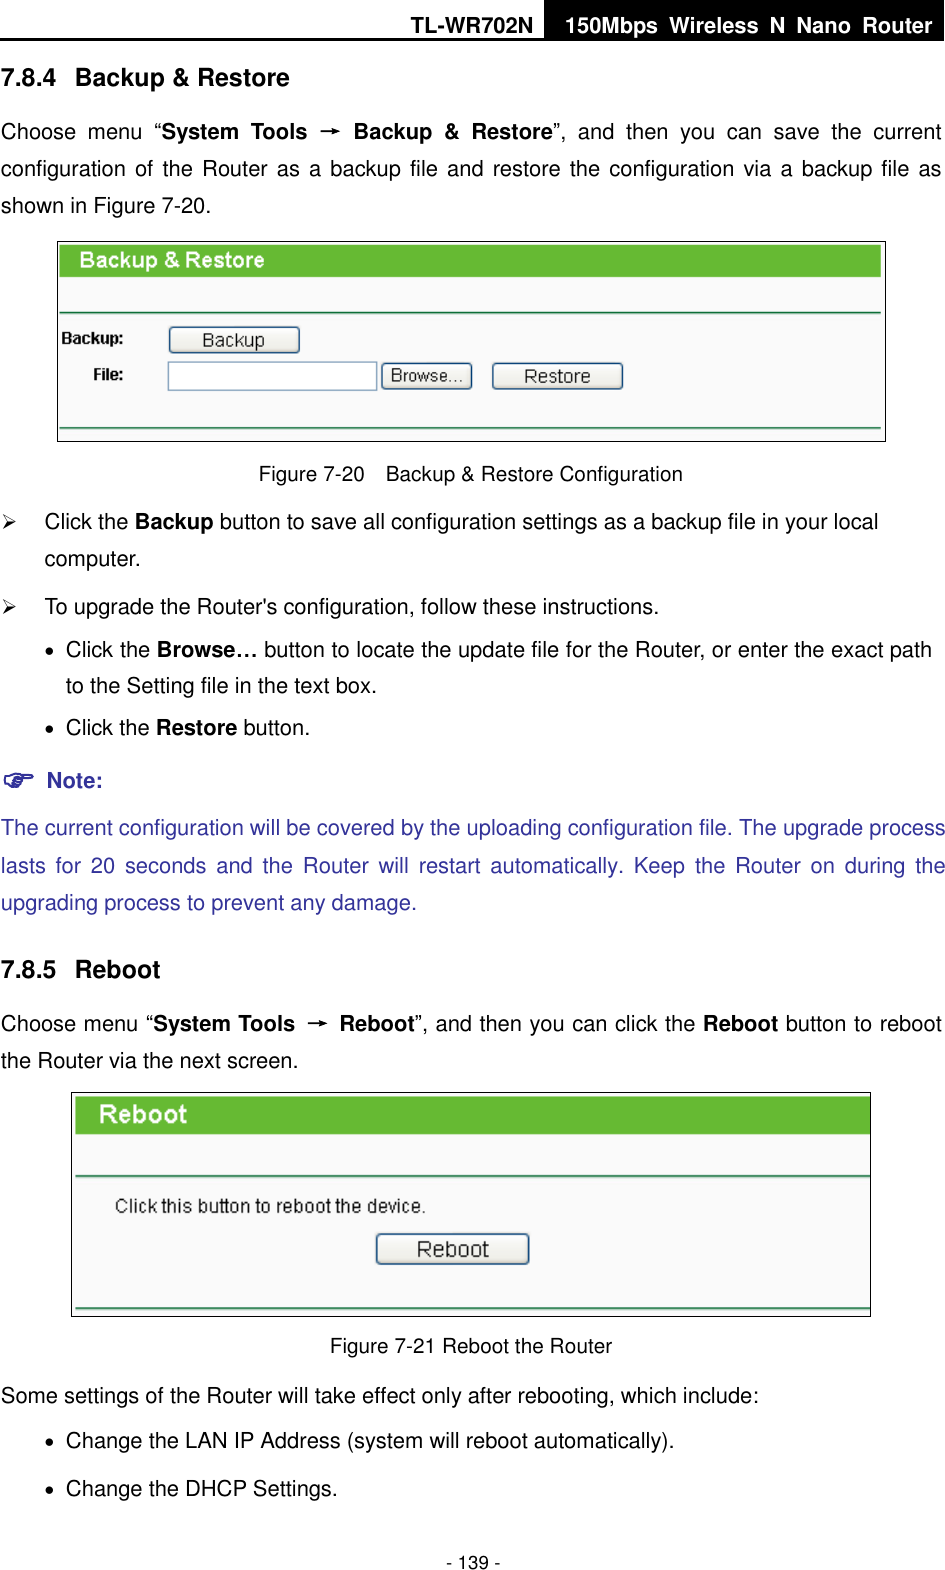 TL-WR702N 150Mbps  Wireless  N  Nano  Router  - 139 - 7.8.4  Backup &amp; Restore Choose  menu  “System  Tools  →  Backup  &amp;  Restore”,  and  then  you  can  save  the  current configuration of the Router as a backup file and restore the configuration via a backup file as shown in Figure 7-20.  Figure 7-20    Backup &amp; Restore Configuration  Click the Backup button to save all configuration settings as a backup file in your local computer.    To upgrade the Router&apos;s configuration, follow these instructions.  Click the Browse… button to locate the update file for the Router, or enter the exact path to the Setting file in the text box.  Click the Restore button.    Note: The current configuration will be covered by the uploading configuration file. The upgrade process lasts for  20  seconds and  the  Router  will  restart  automatically. Keep  the  Router on  during the upgrading process to prevent any damage.   7.8.5  Reboot Choose menu “System Tools  →  Reboot”, and then you can click the Reboot button to reboot the Router via the next screen.  Figure 7-21 Reboot the Router Some settings of the Router will take effect only after rebooting, which include:  Change the LAN IP Address (system will reboot automatically).  Change the DHCP Settings. 